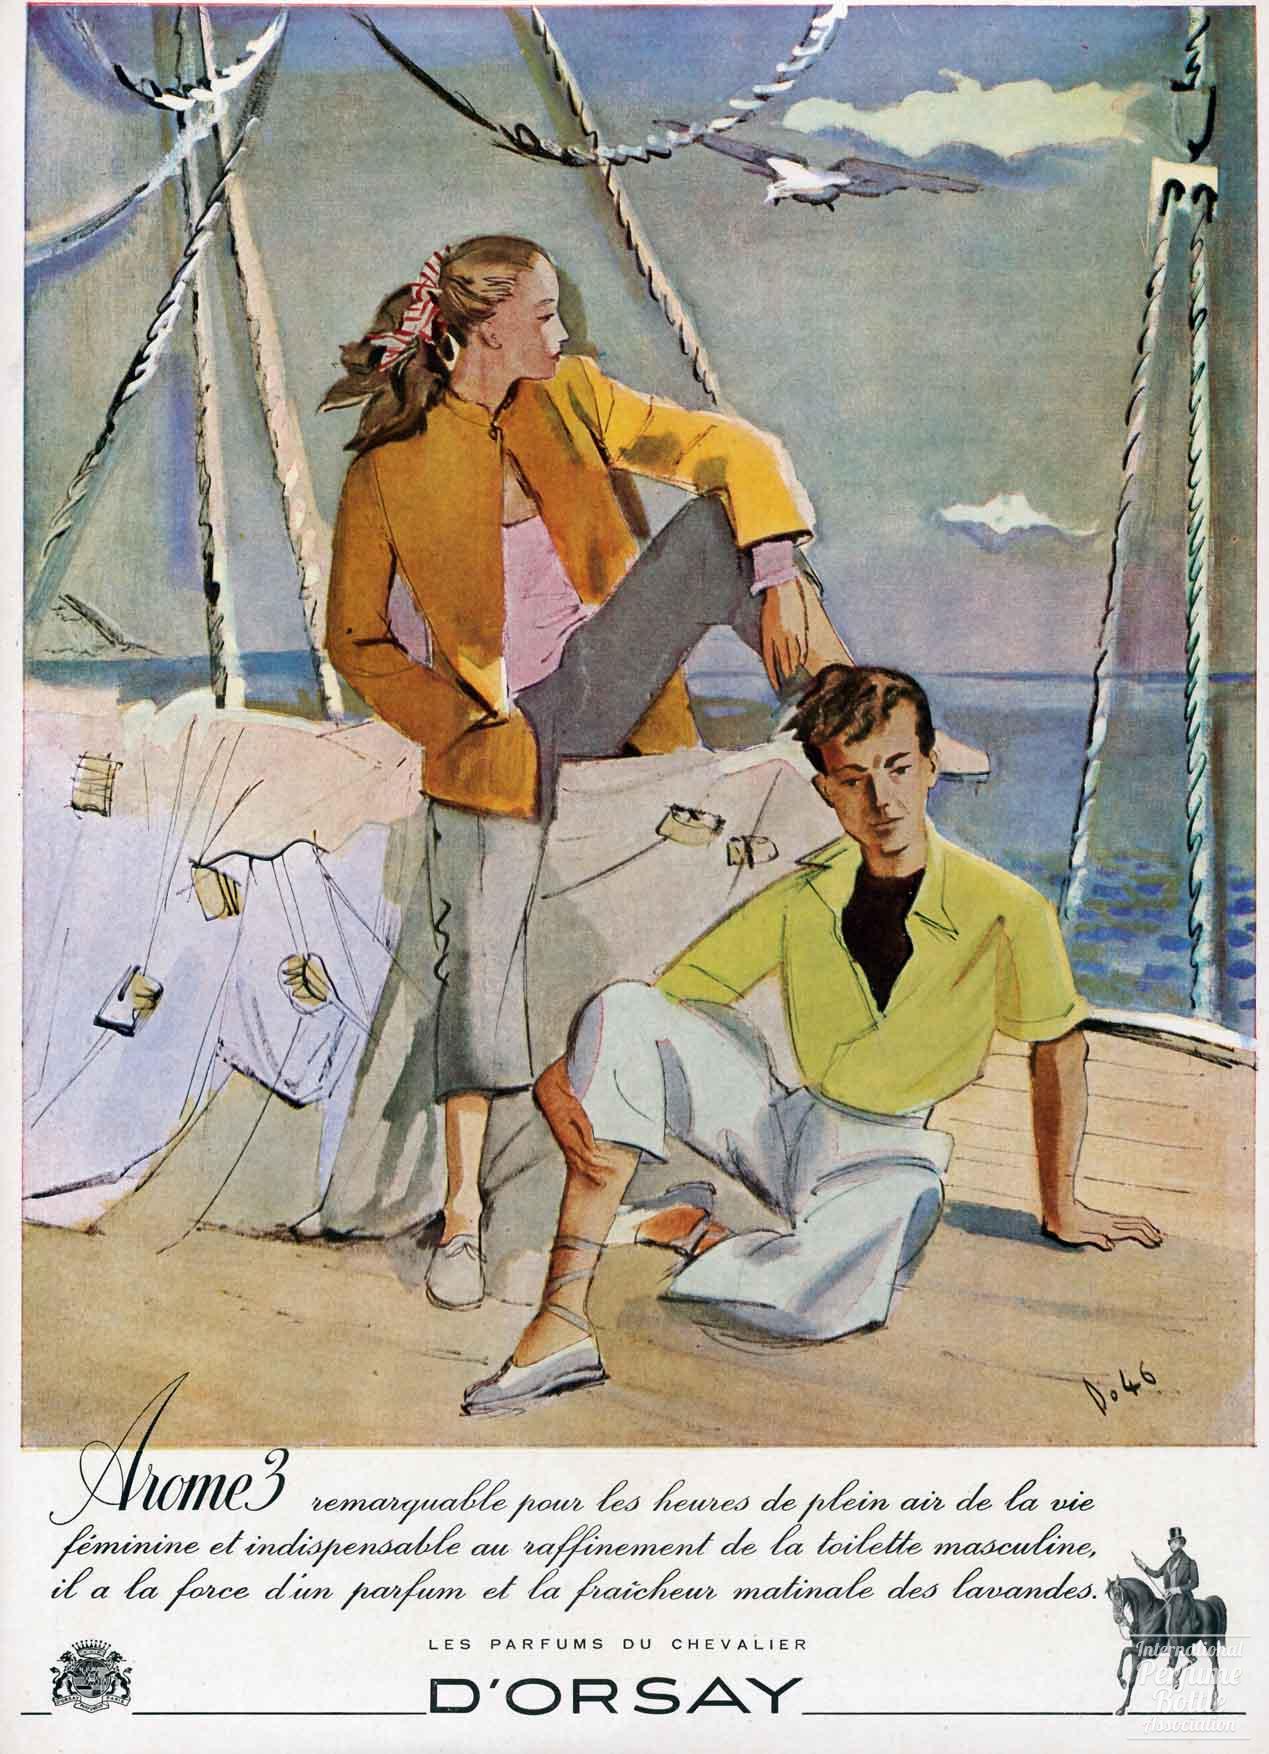 "Arome 3" by D'Orsay Advertisement - 1946